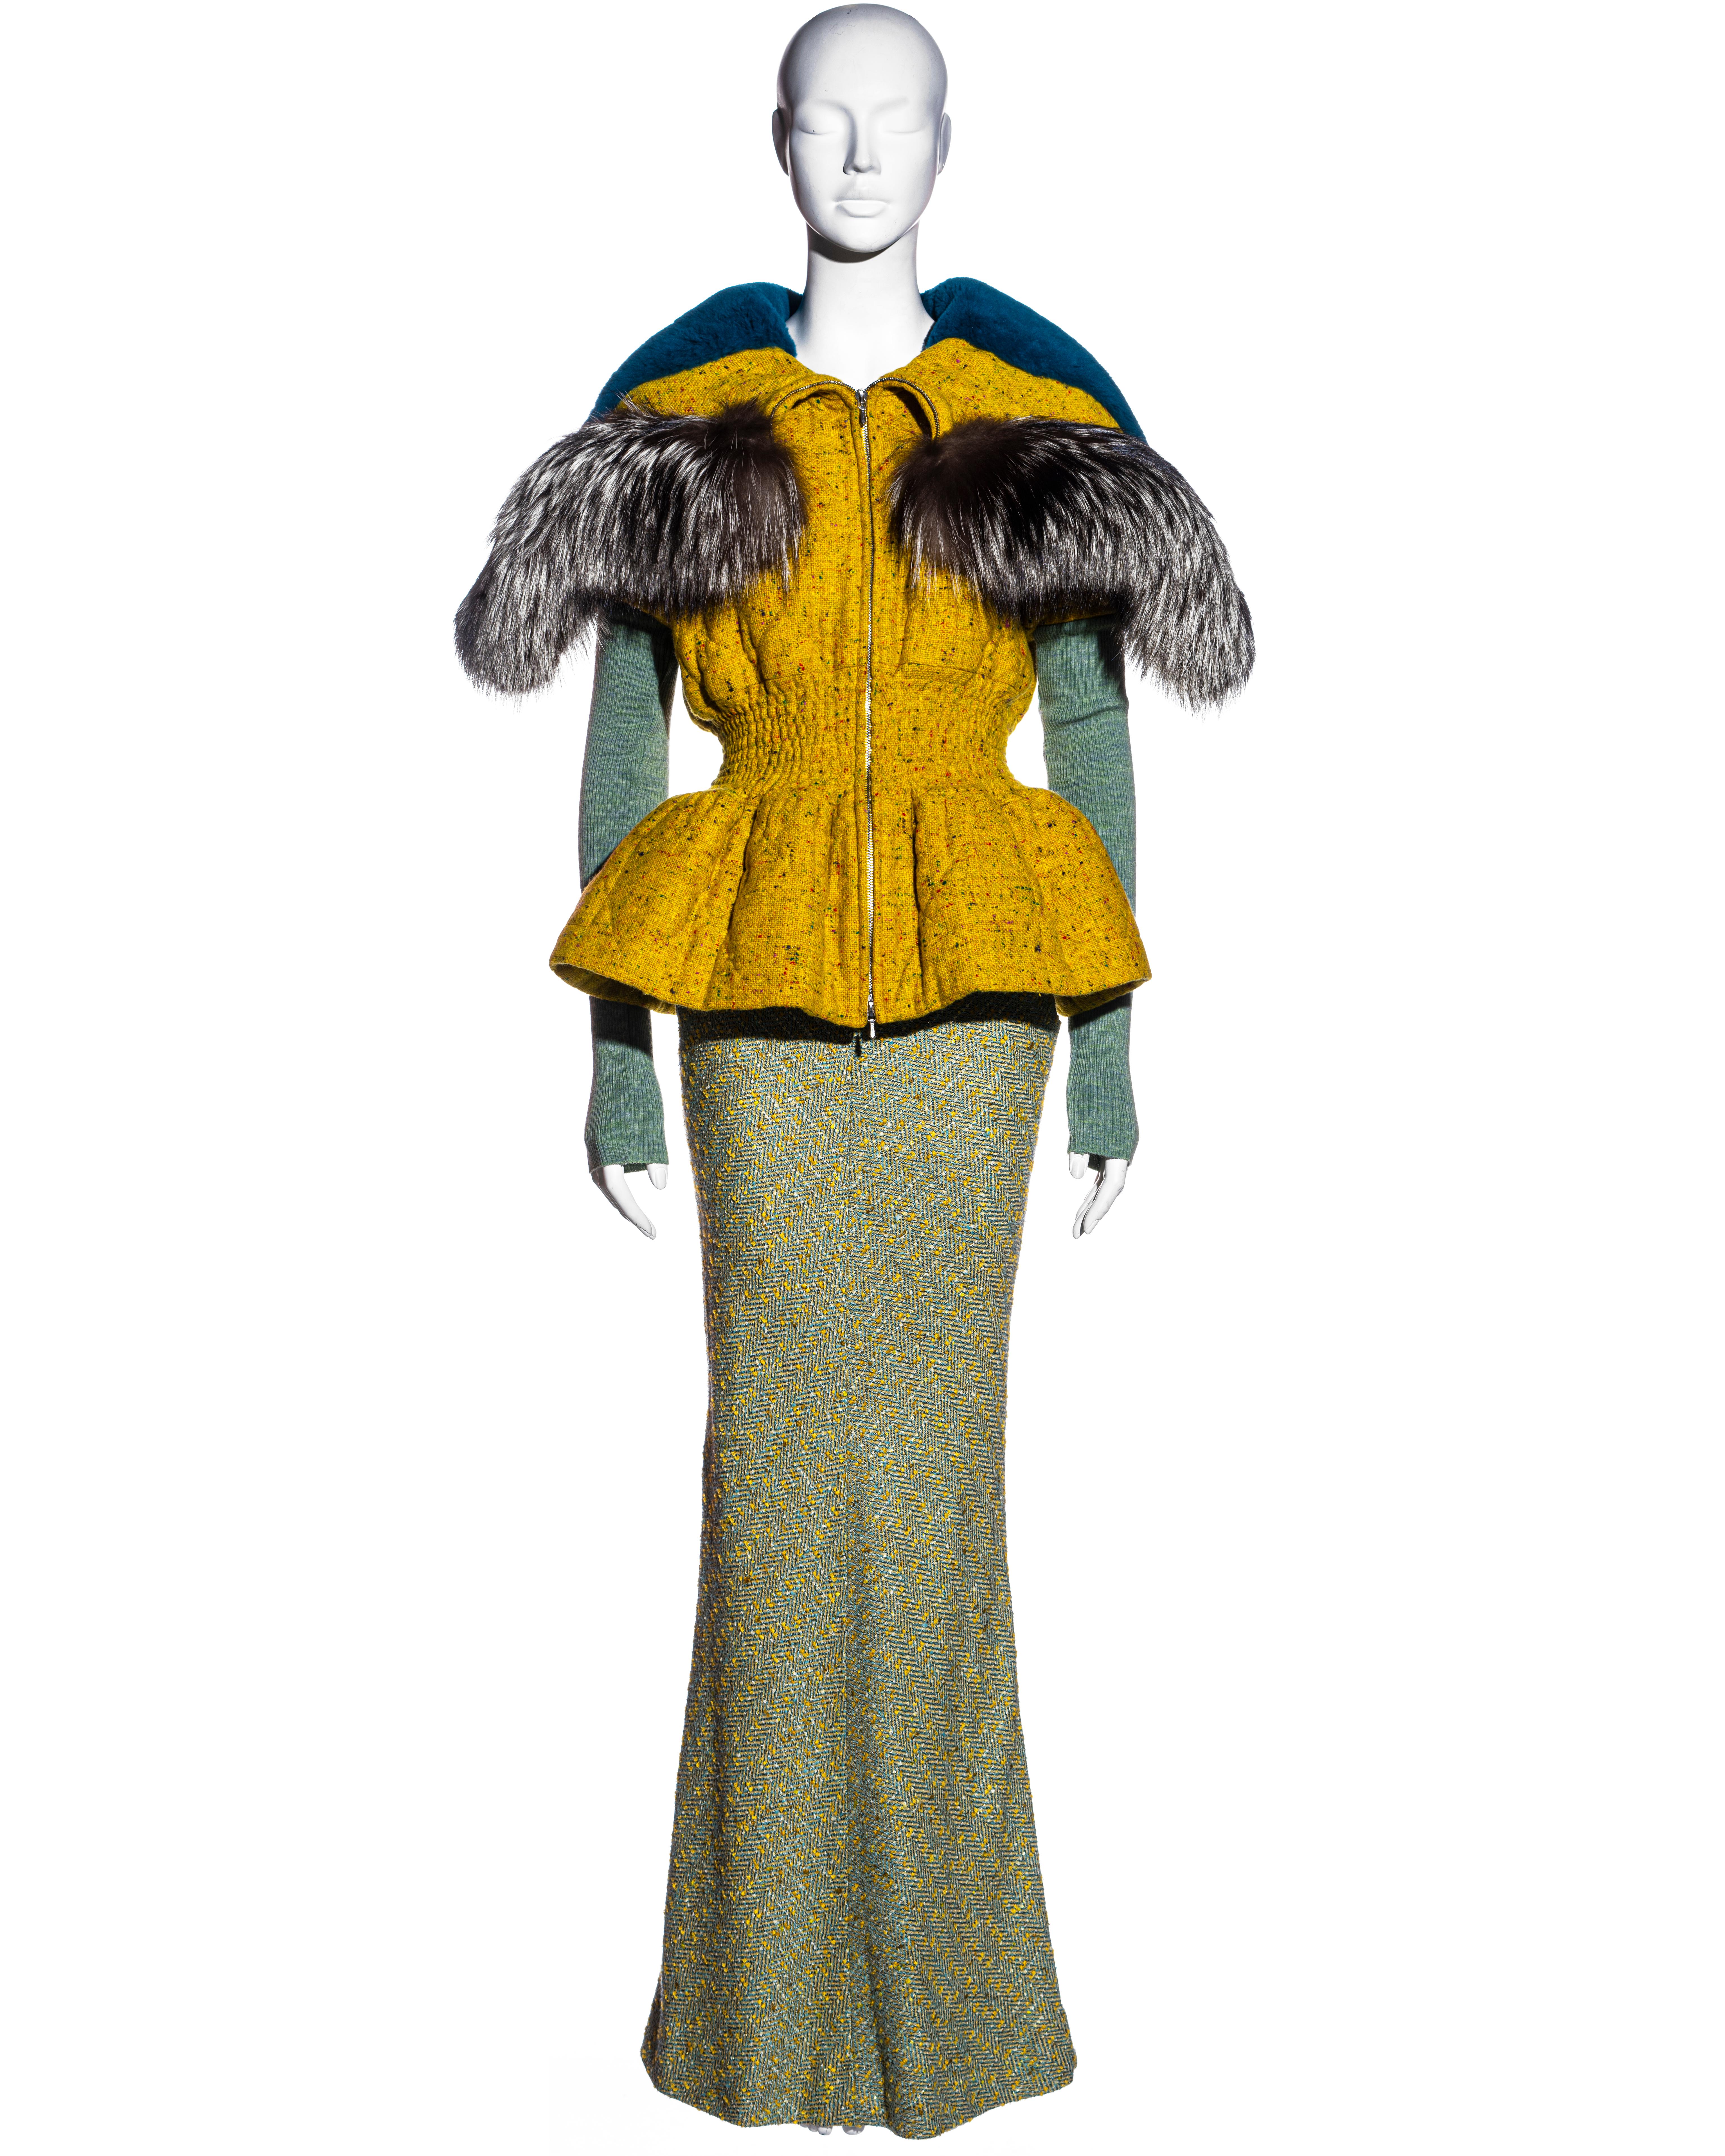 ▪ Christian Dior jacket and skirt runway ensemble 
▪ Designed by John Galliano 
▪ Yellow Donegal tweed parka style jacket with Cannage quilt 
▪ Nipped-in waist
▪ Large hood trimmed in grey fox and lined with blue beaver 
▪ Detachable rib-knit